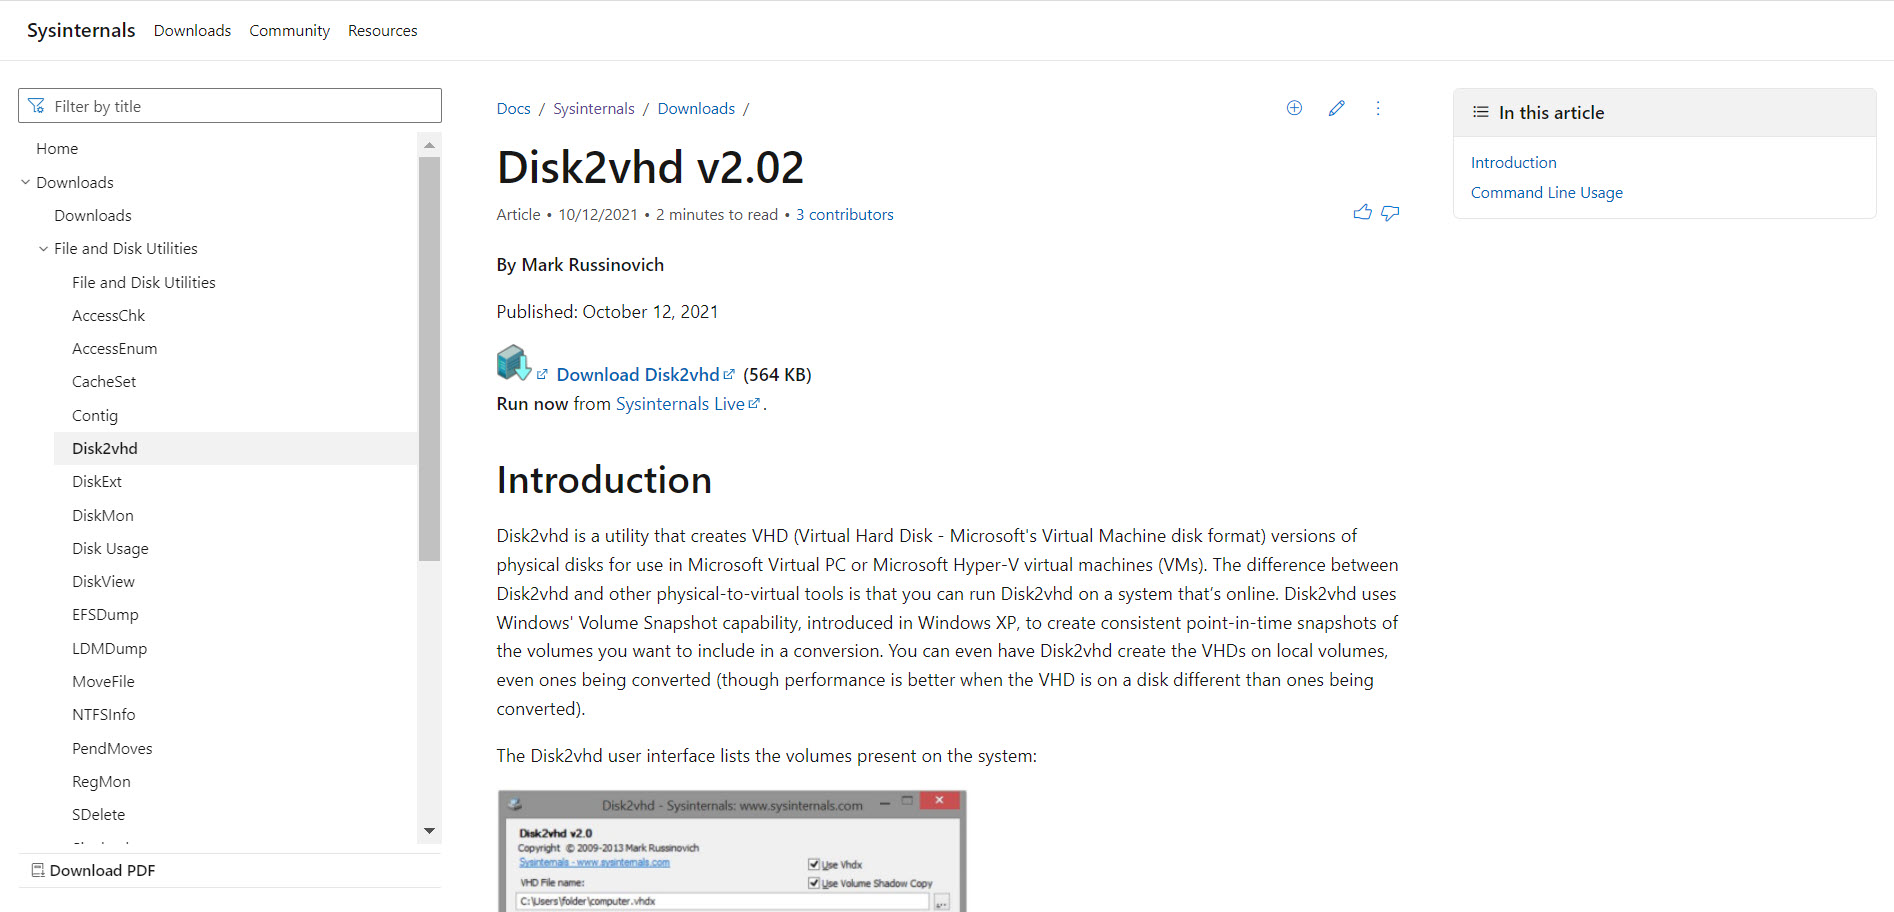 Part 3 - Download Disk2vhd from the Microsoft website